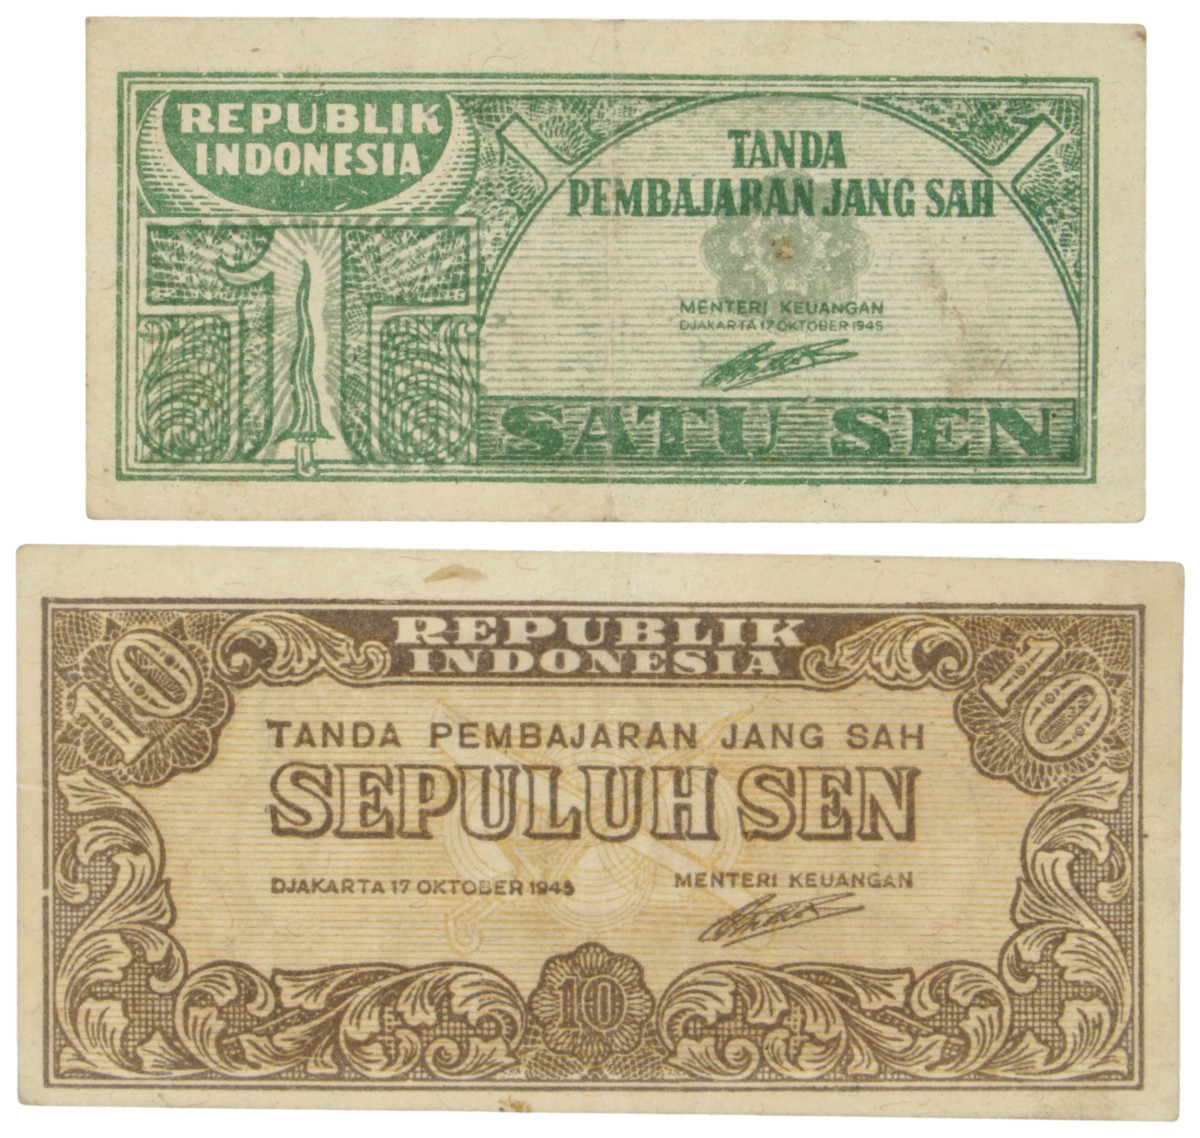 Indonesia. 1/10 Sen. Banknote. Type 1945. - Very fine / Extremely fine.